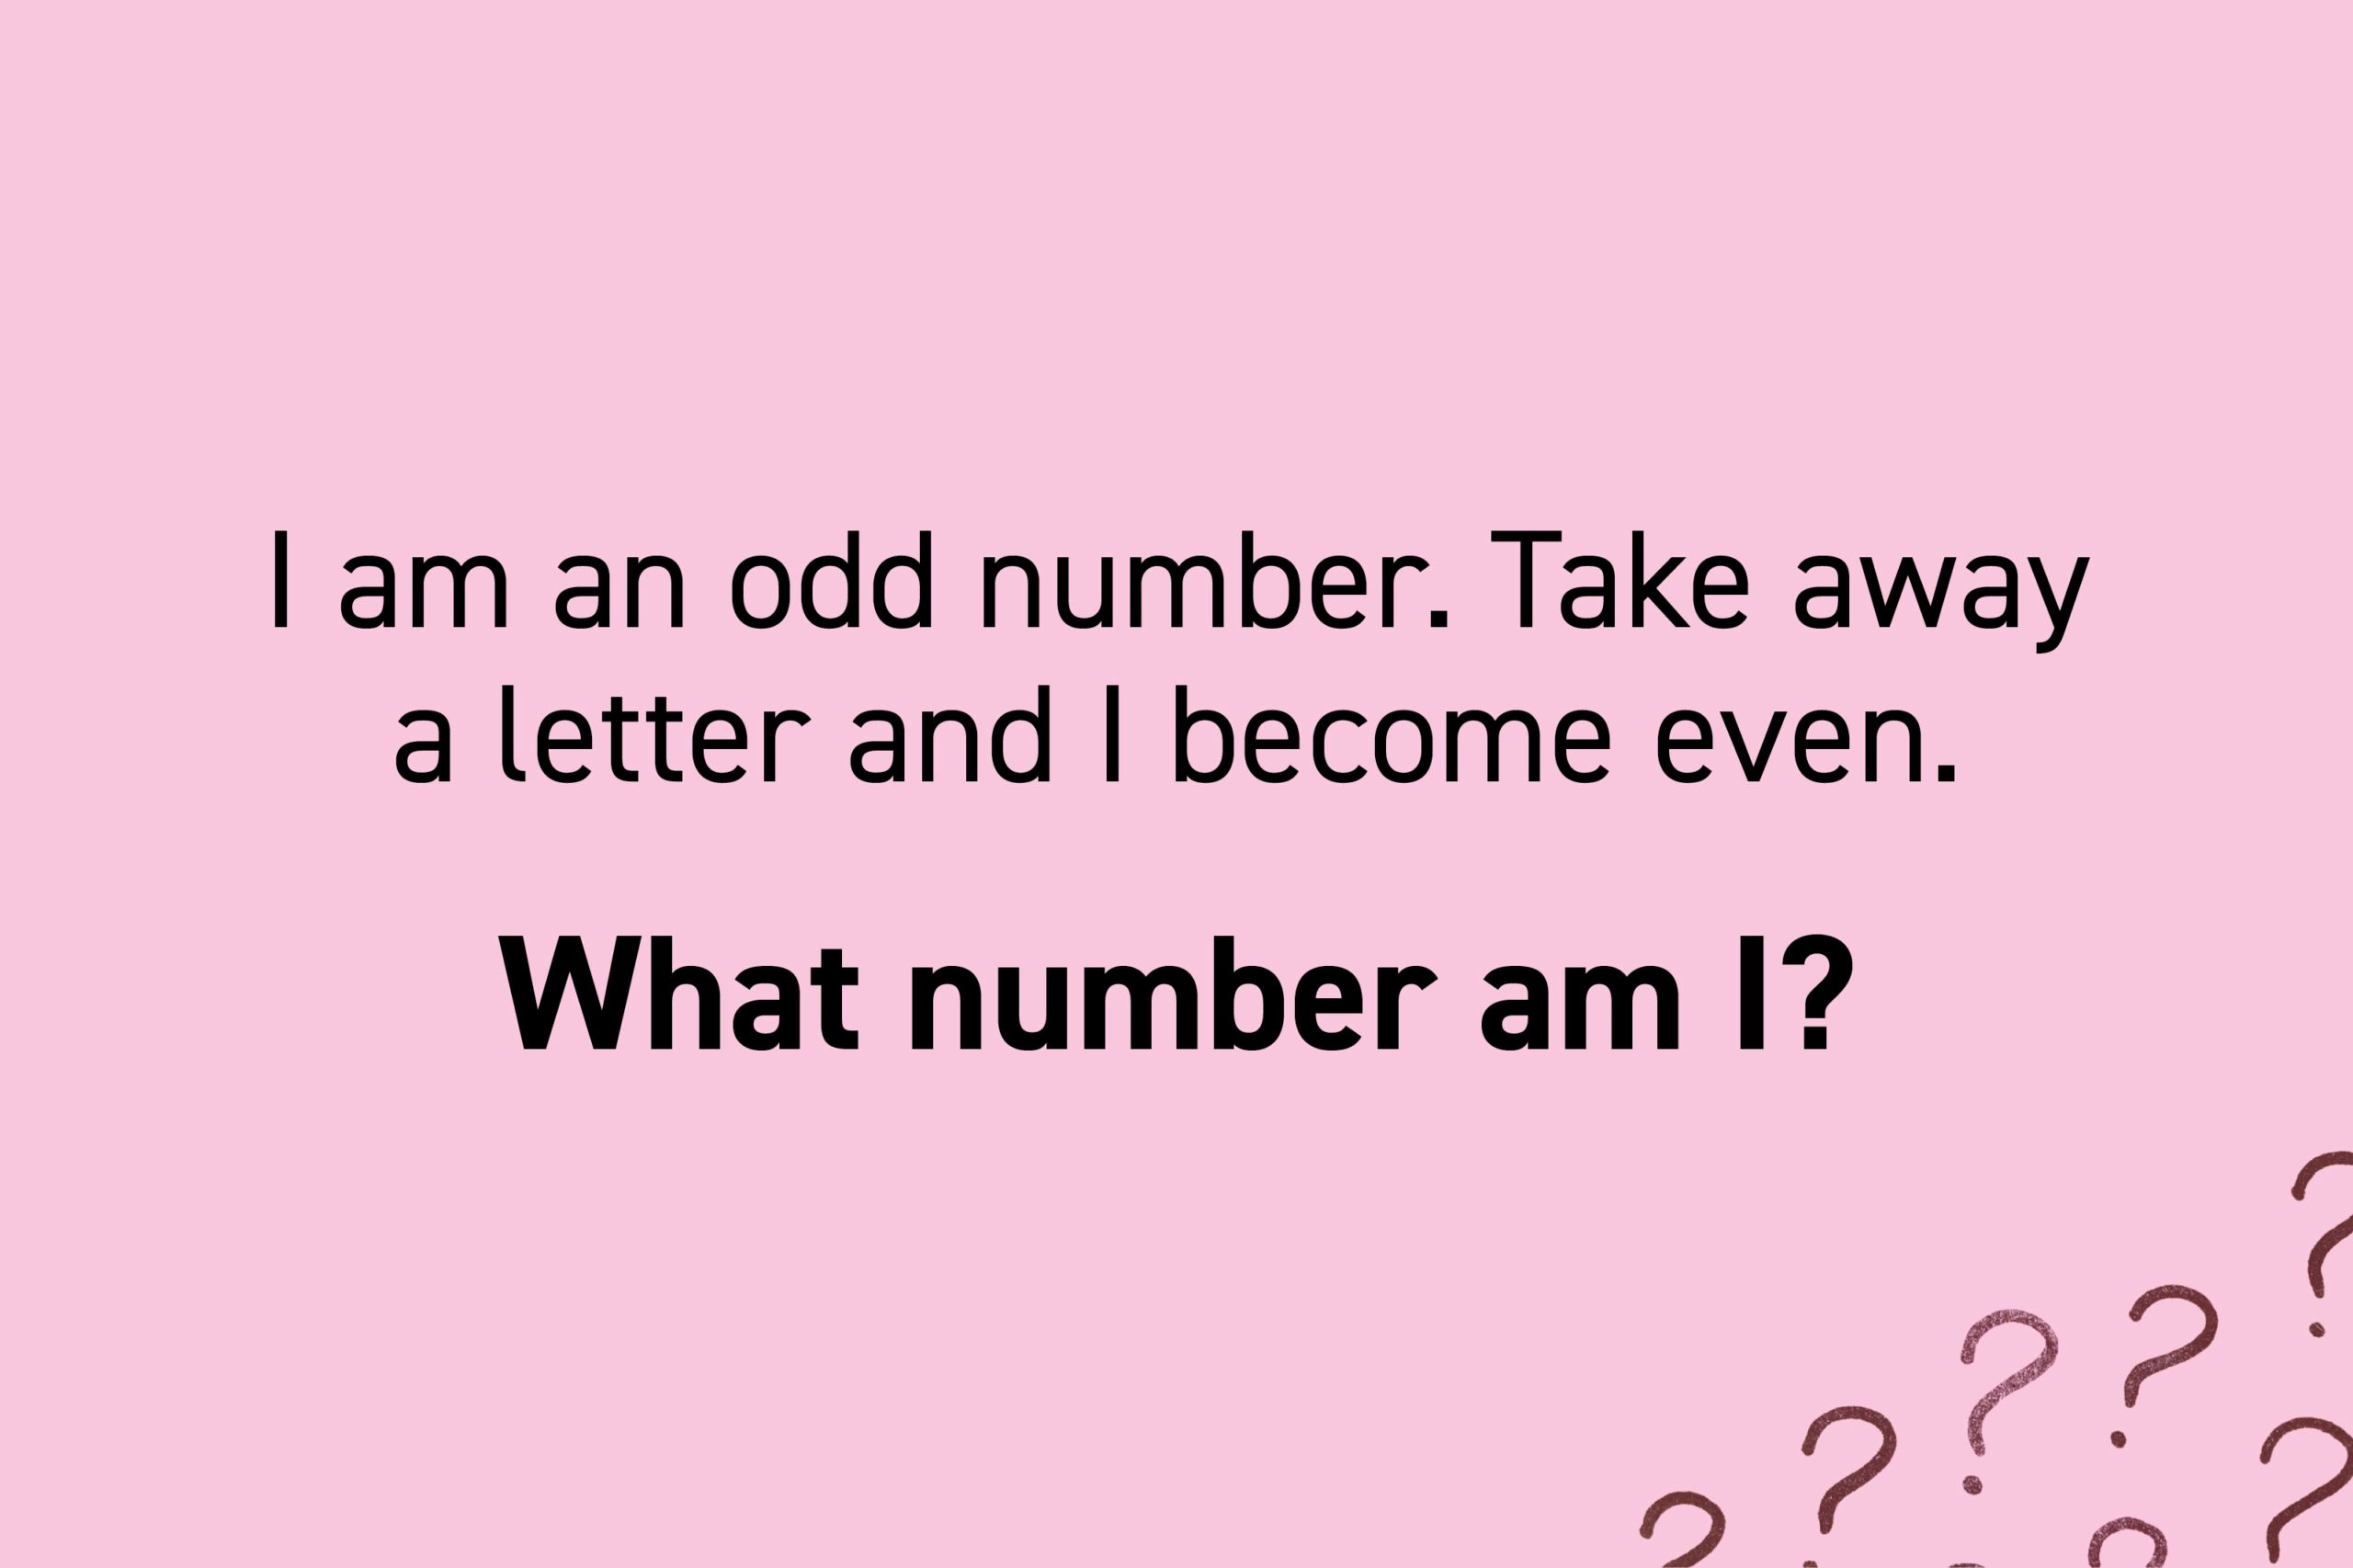 I am an odd number. Take away a letter and I become even. What number am I?